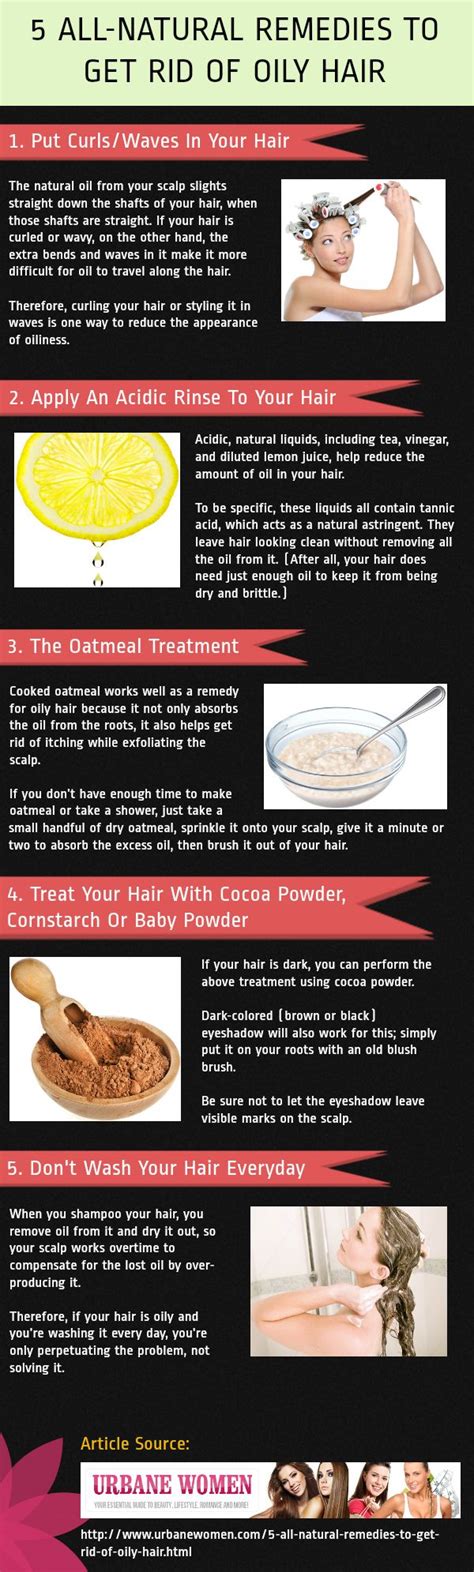 5 All Natural Remedies To Get Rid Of Oily Hair Infographic Mixed